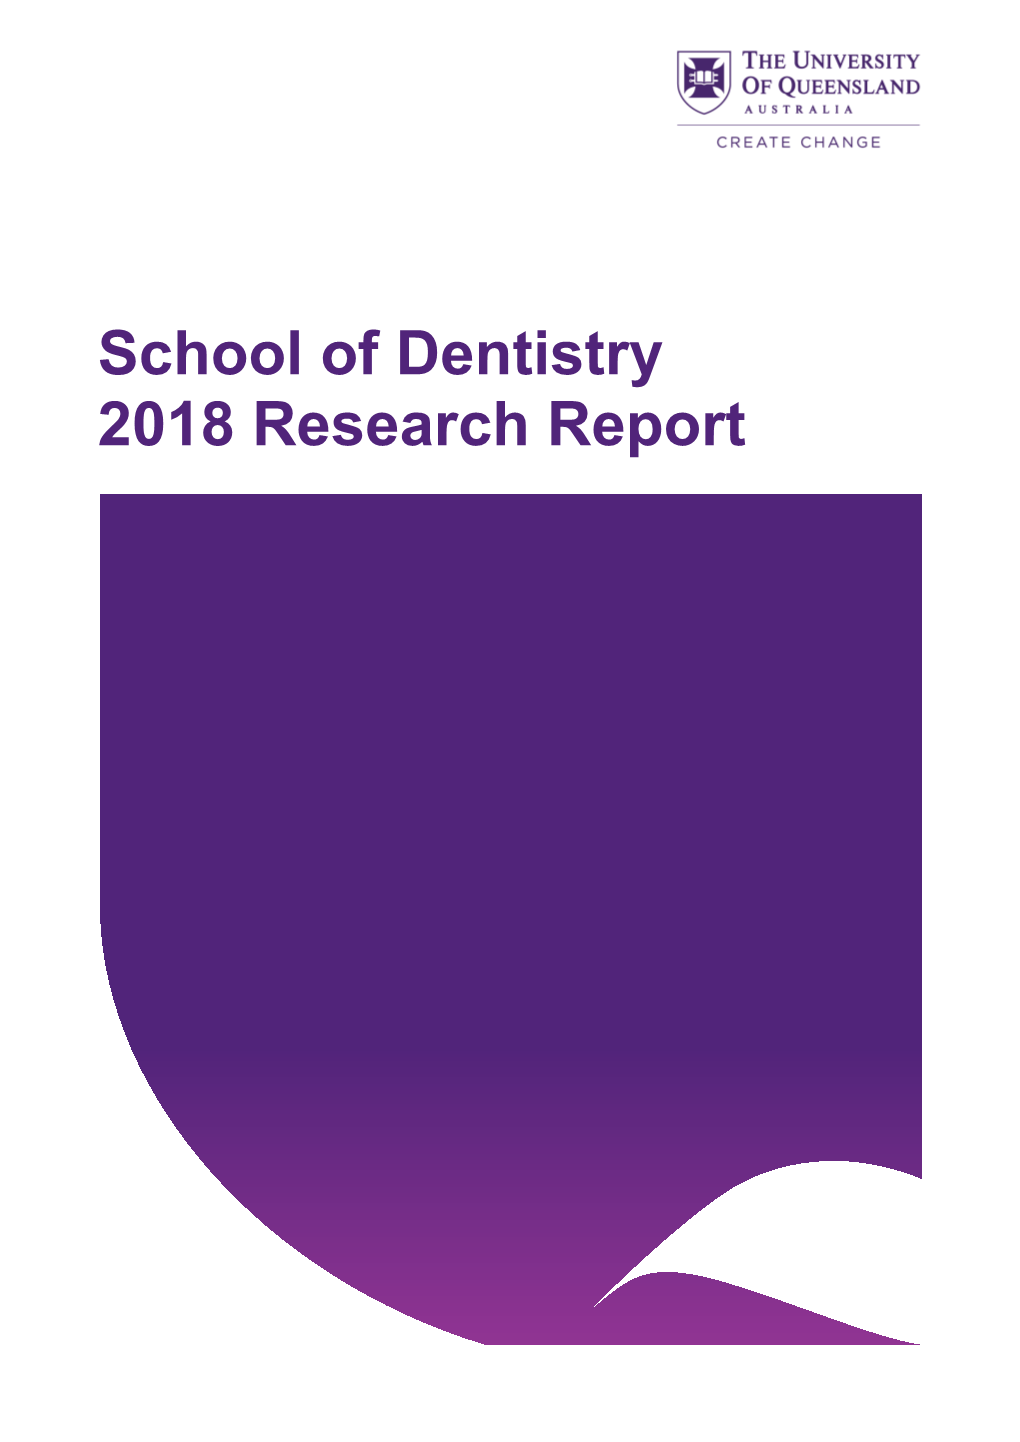 School of Dentistry 2018 Research Report